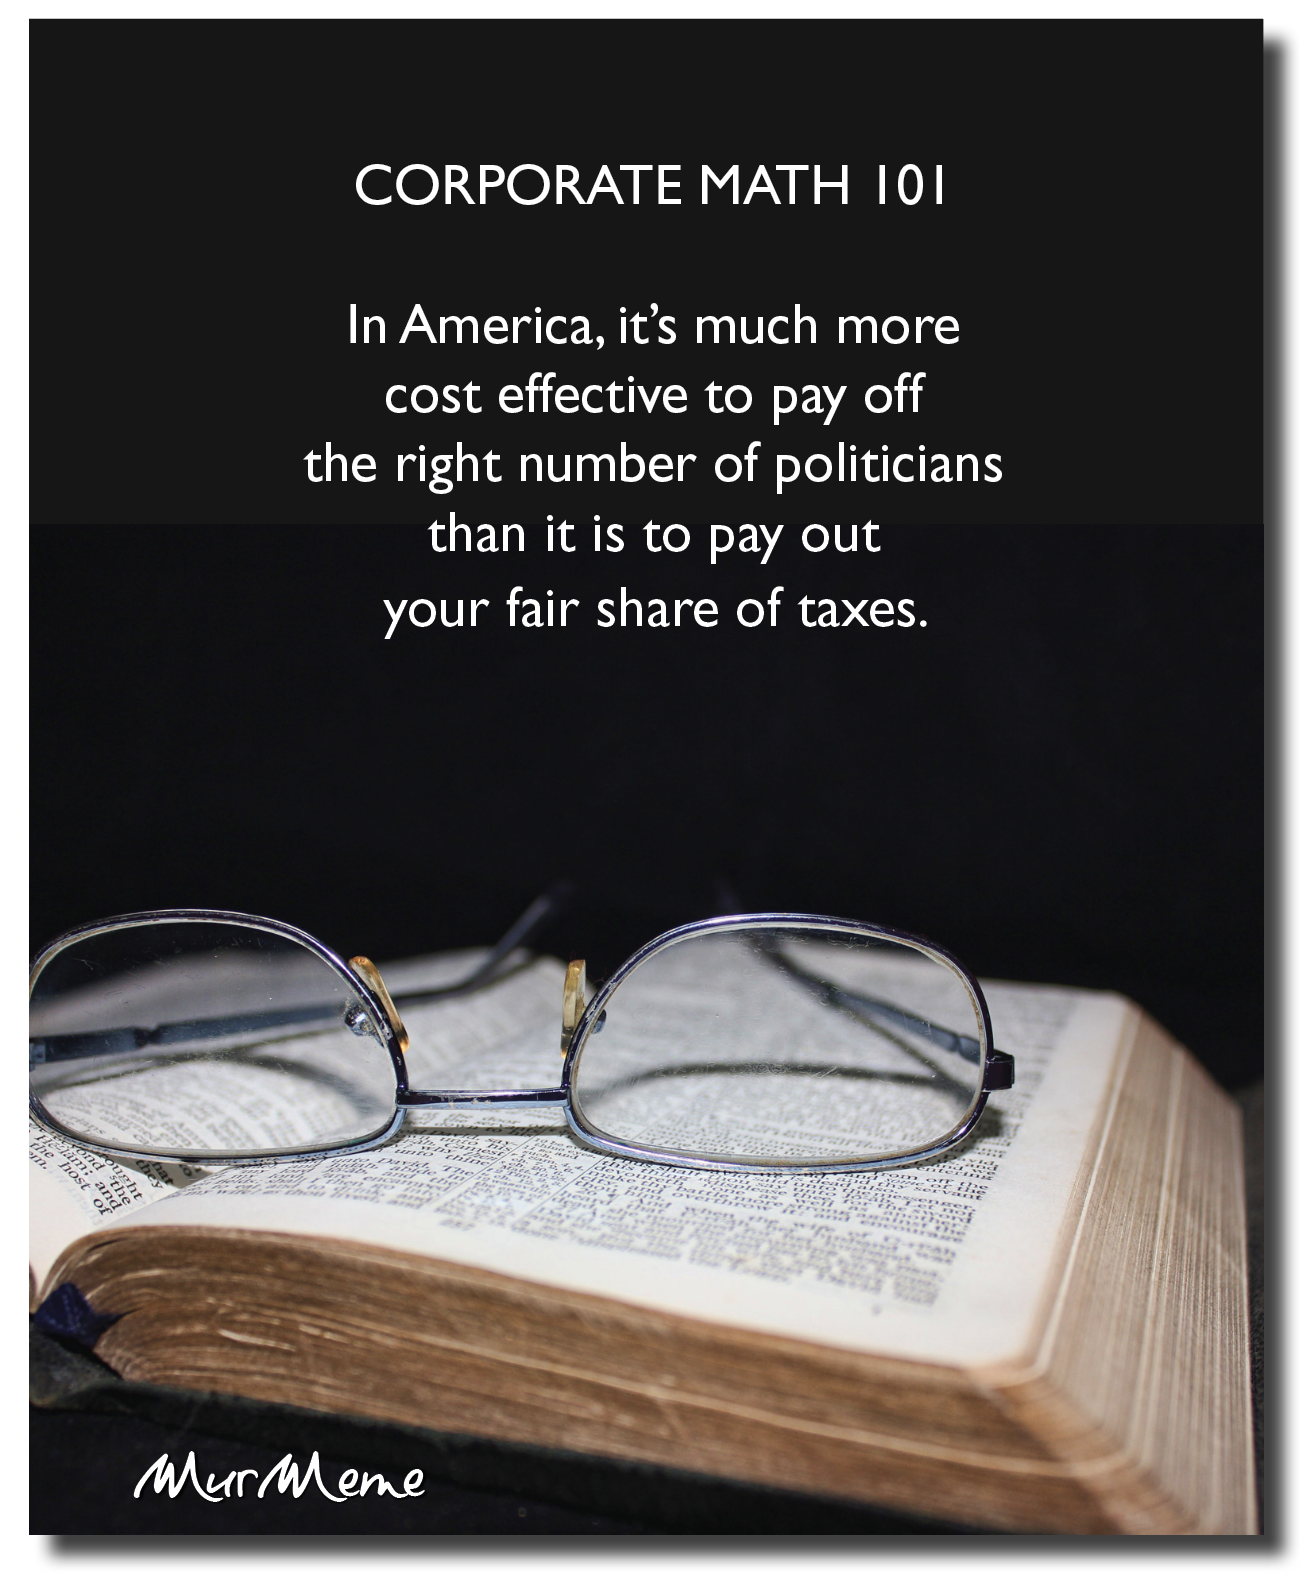 CORPORATE MATH 101

In America, it’s much more
cost effective to pay off
the right number of politicians
than it is to pay out
your fair share of taxes.